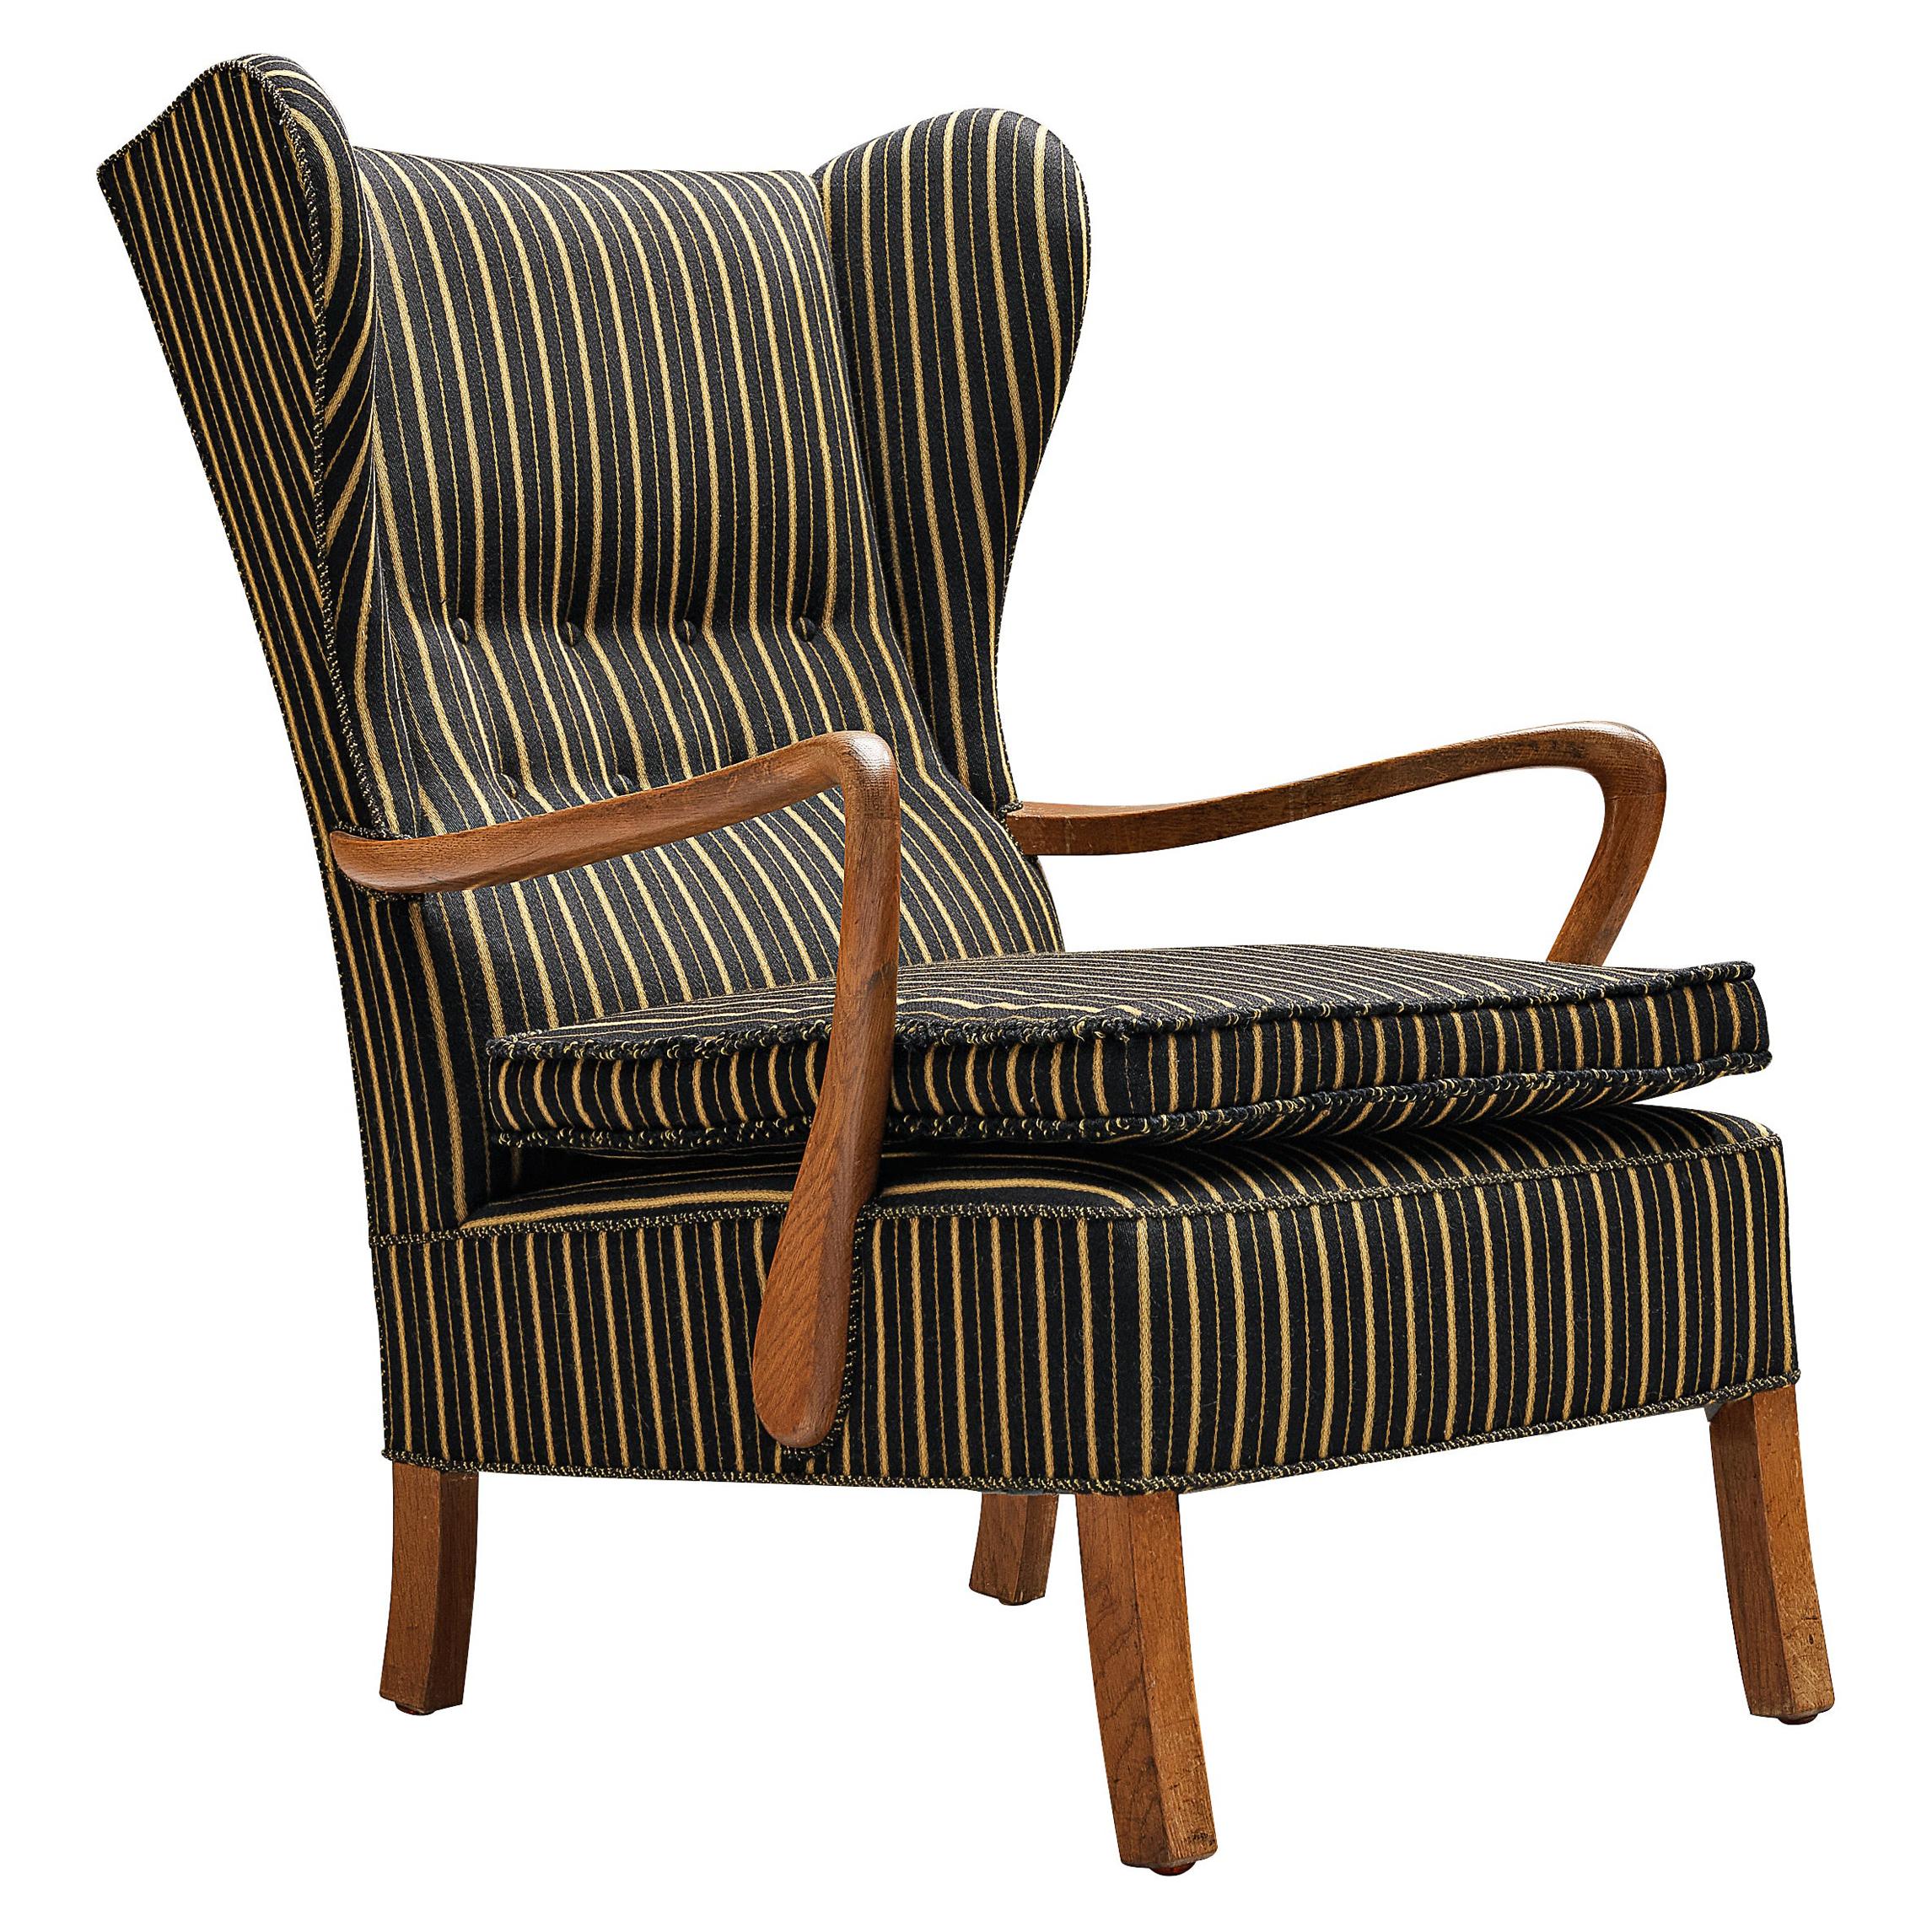 Danish Lounge Chair in Striped Upholstery